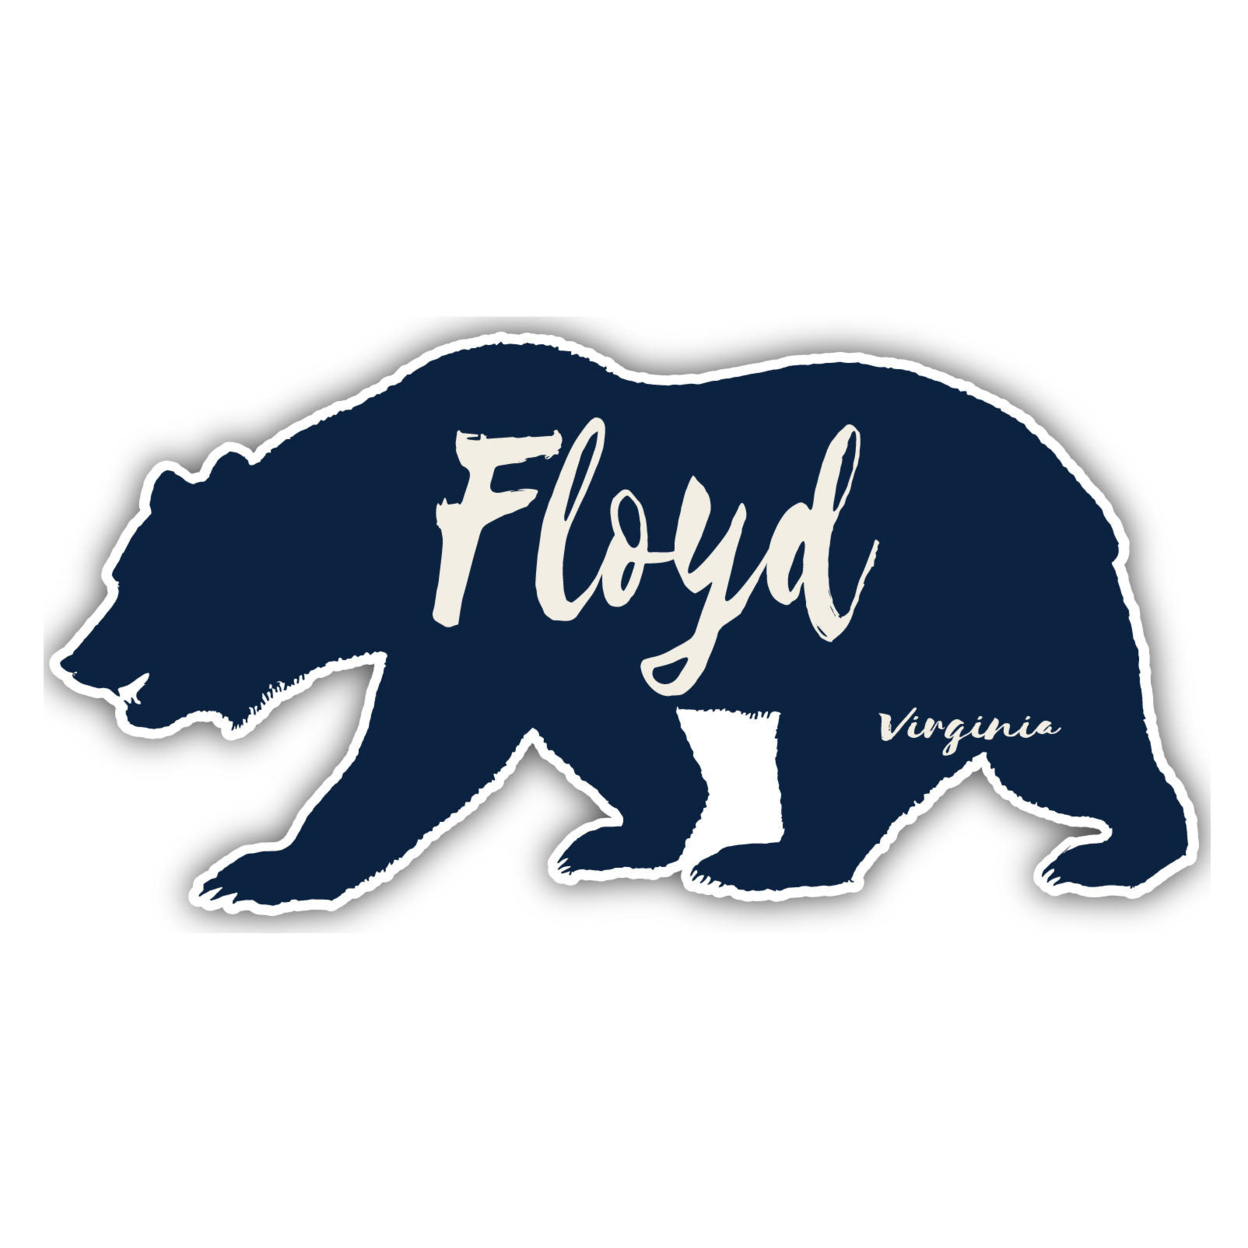 Floyd Virginia Souvenir Decorative Stickers (Choose Theme And Size) - 4-Pack, 10-Inch, Great Outdoors